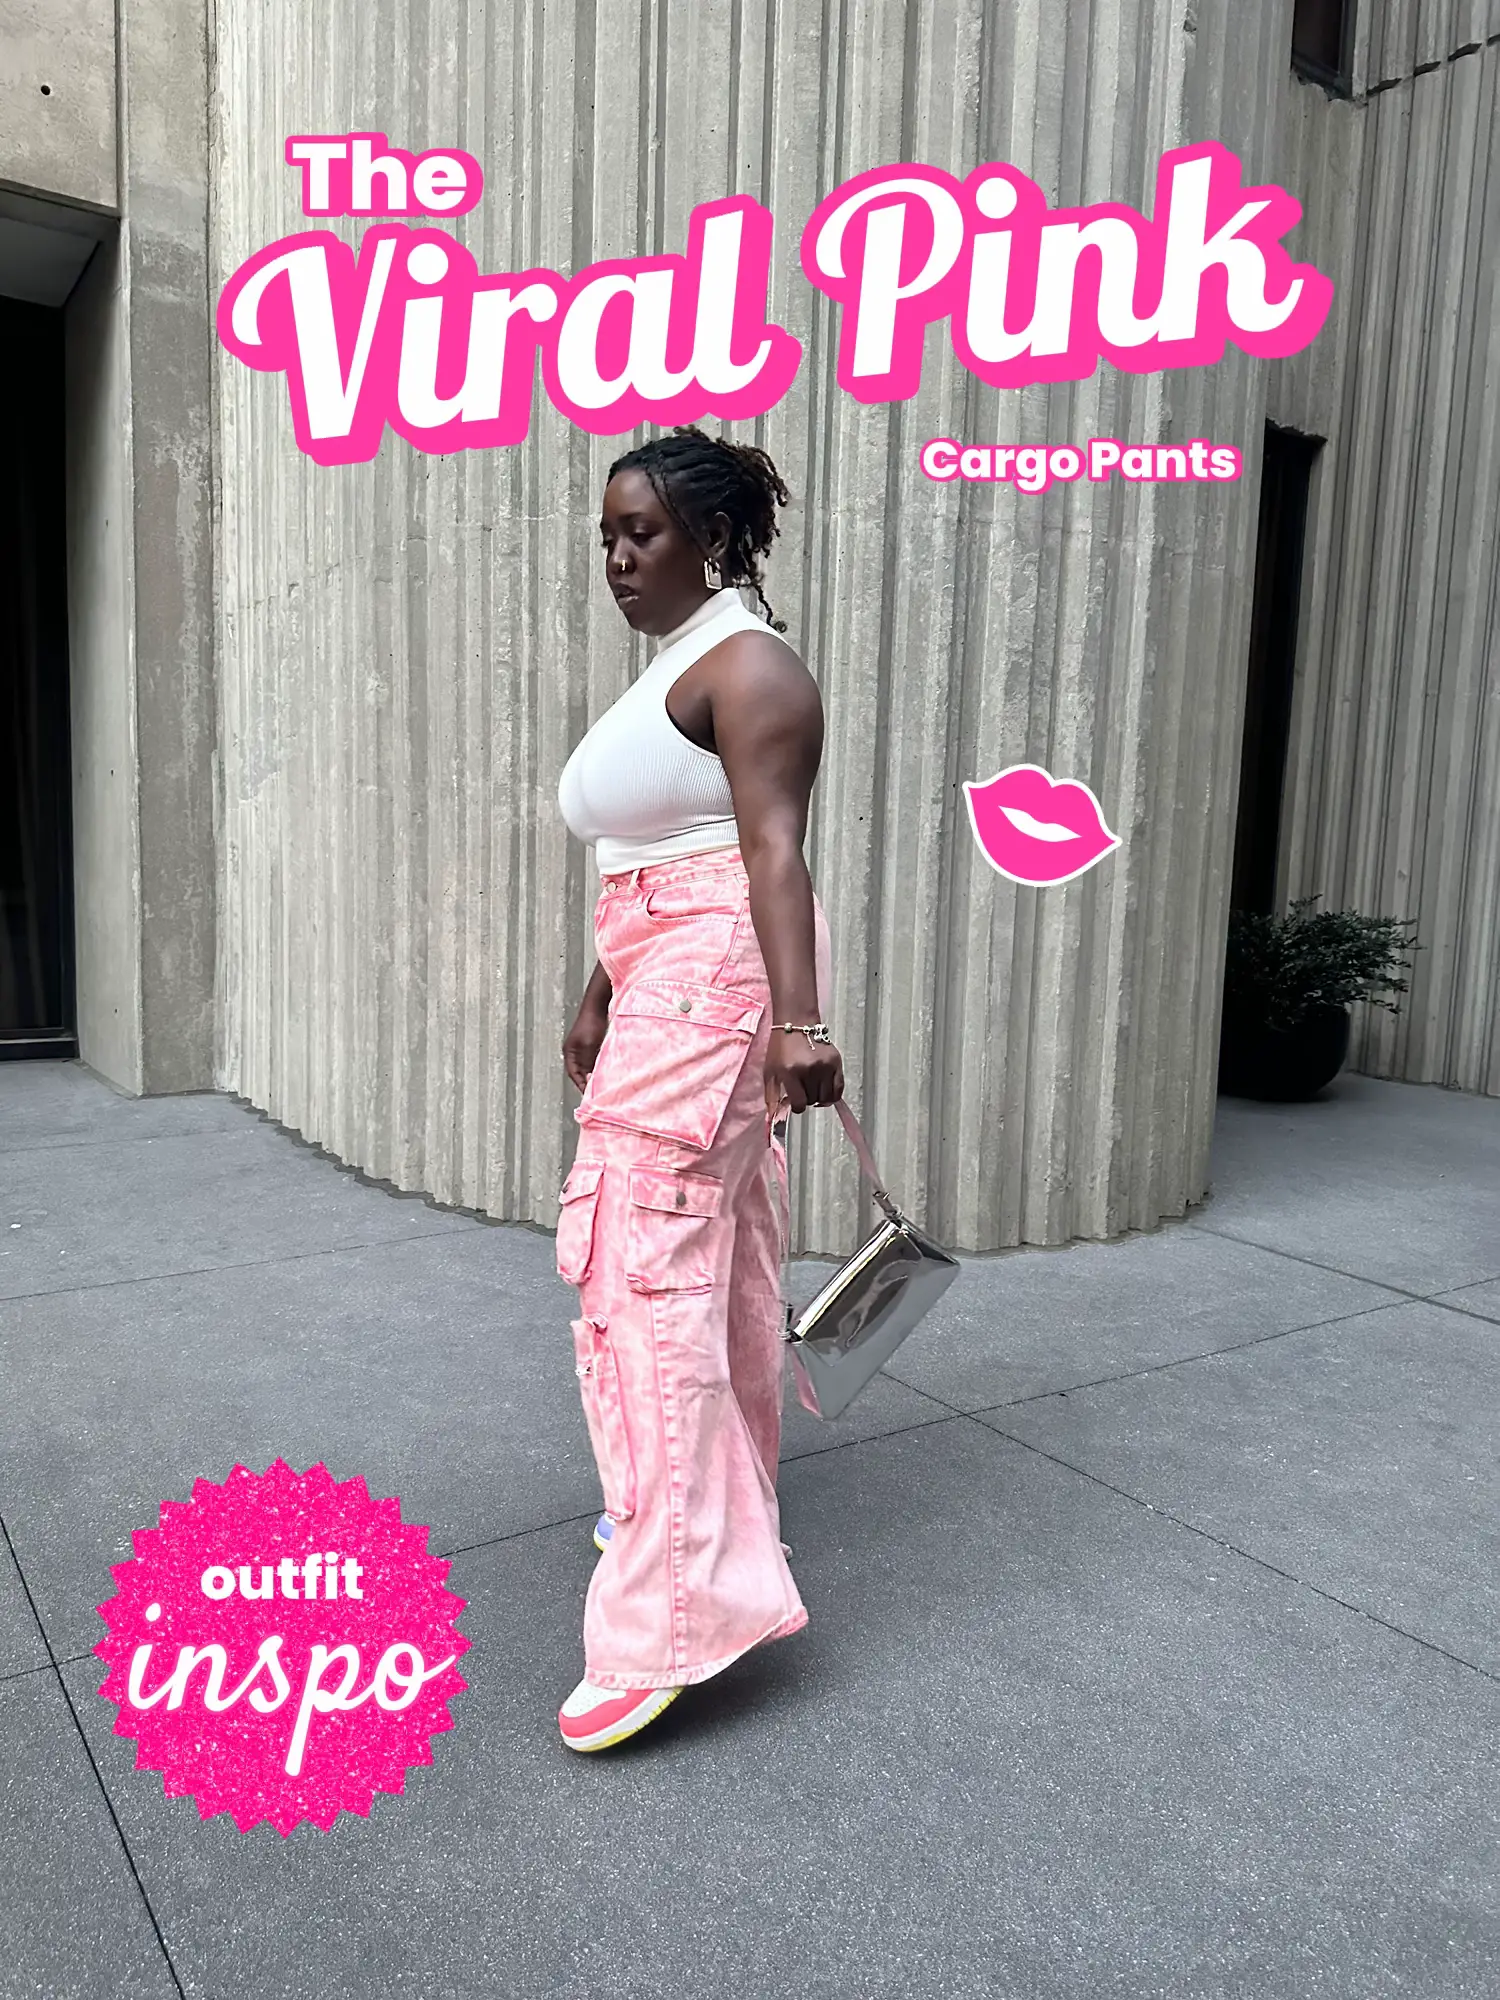 Viral Pink Cargo Pants 💗💓💞, Gallery posted by Kennedi 🤎